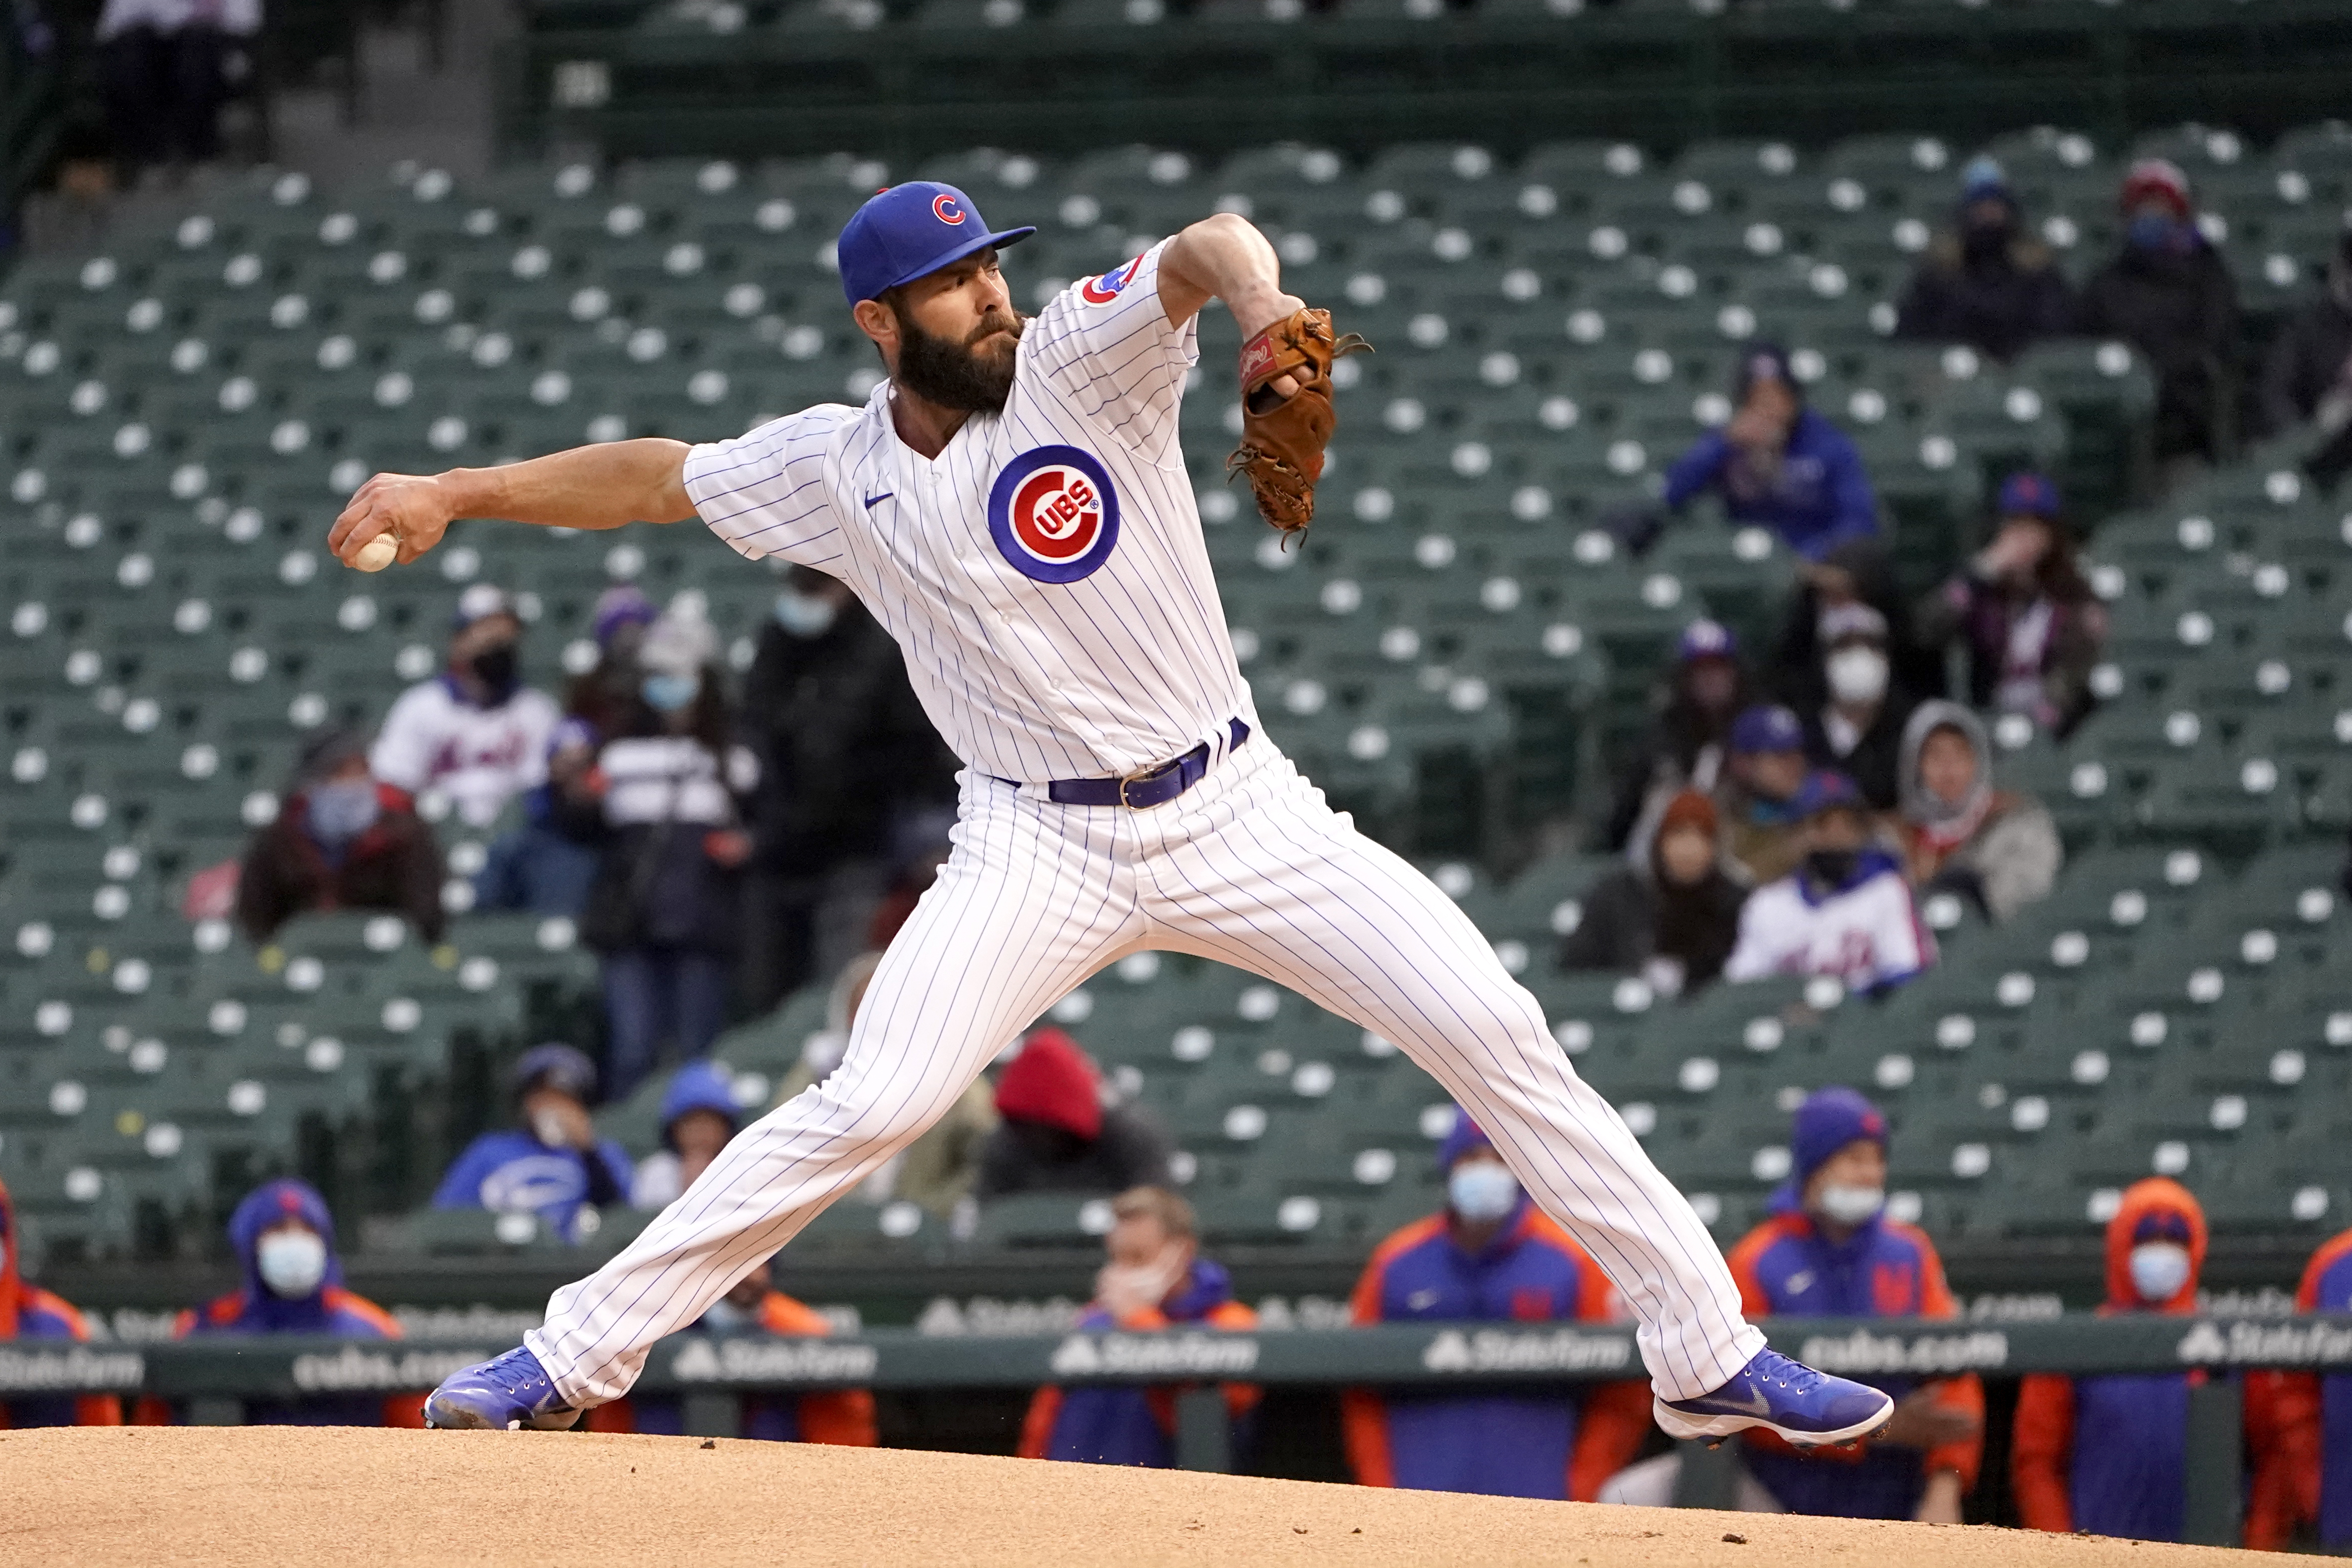 Arrieta pitches Cubs to 3-1 win over Mets on cool night